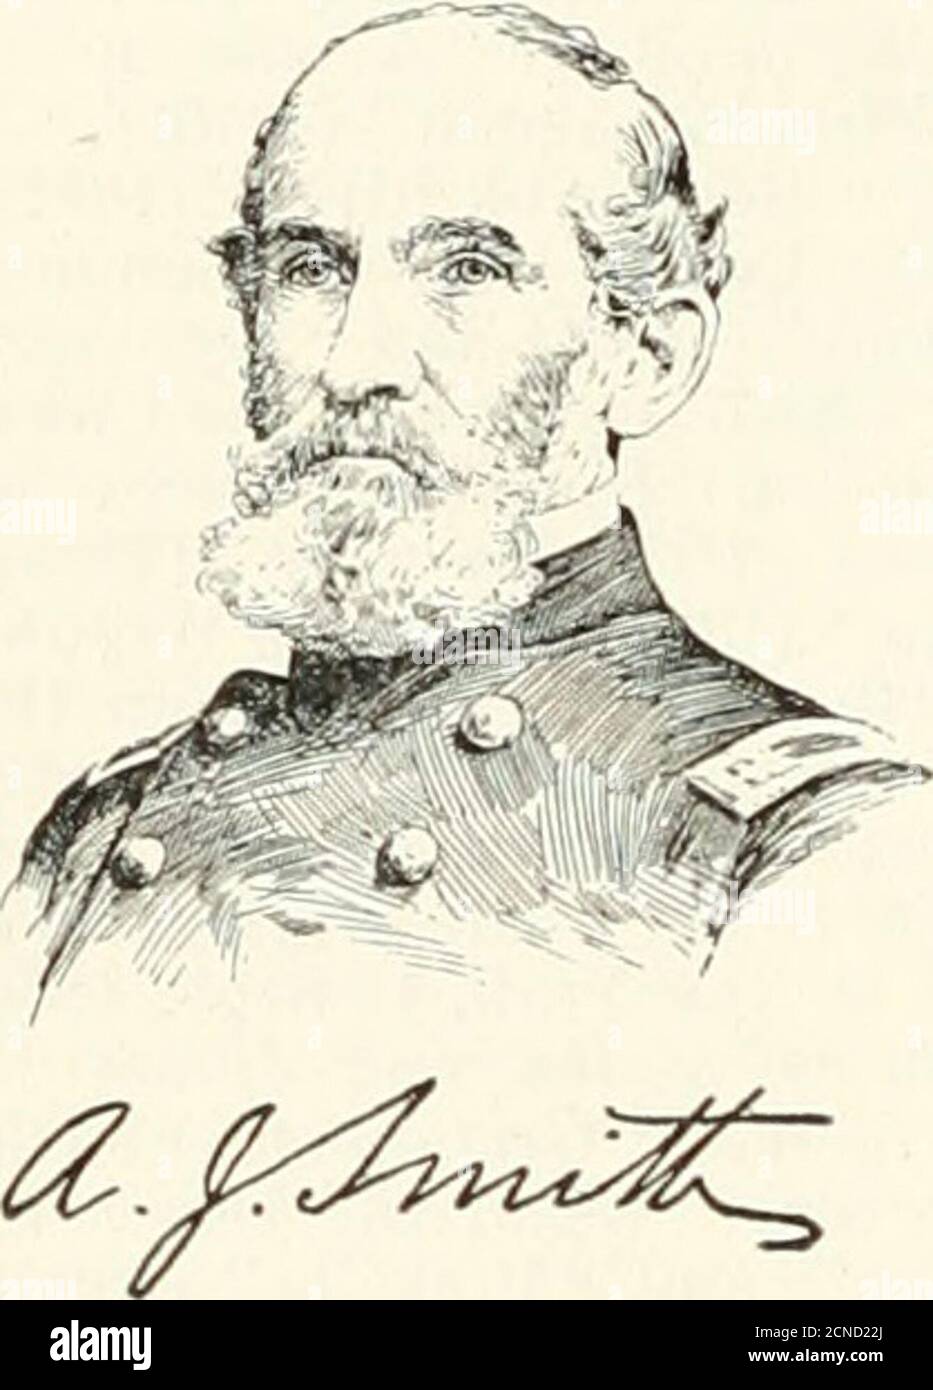 . Appleton's cyclopaedia of American biography . uring the Red River cam-paign, in April, 1864, receiving the brevet of colo-nel, U. S. army, for gallant and meritorious ser-vice at Pleasant Hill. He became lieutenant-colo-nel, U. S. army, in May. 1864, and major-generalof volunteers on the 12th of that month, was or-dered to Missouri, aided in driving Gen. SterlingPrice from the state, and was then called to re-enforce Gen. George H. Thomas at Nashville, andto aid in pursuit of Gen. John B. Hoods army, be-ing engaged at Nashville. He received the brevetsof brigadier-general and major-general, Stock Photo